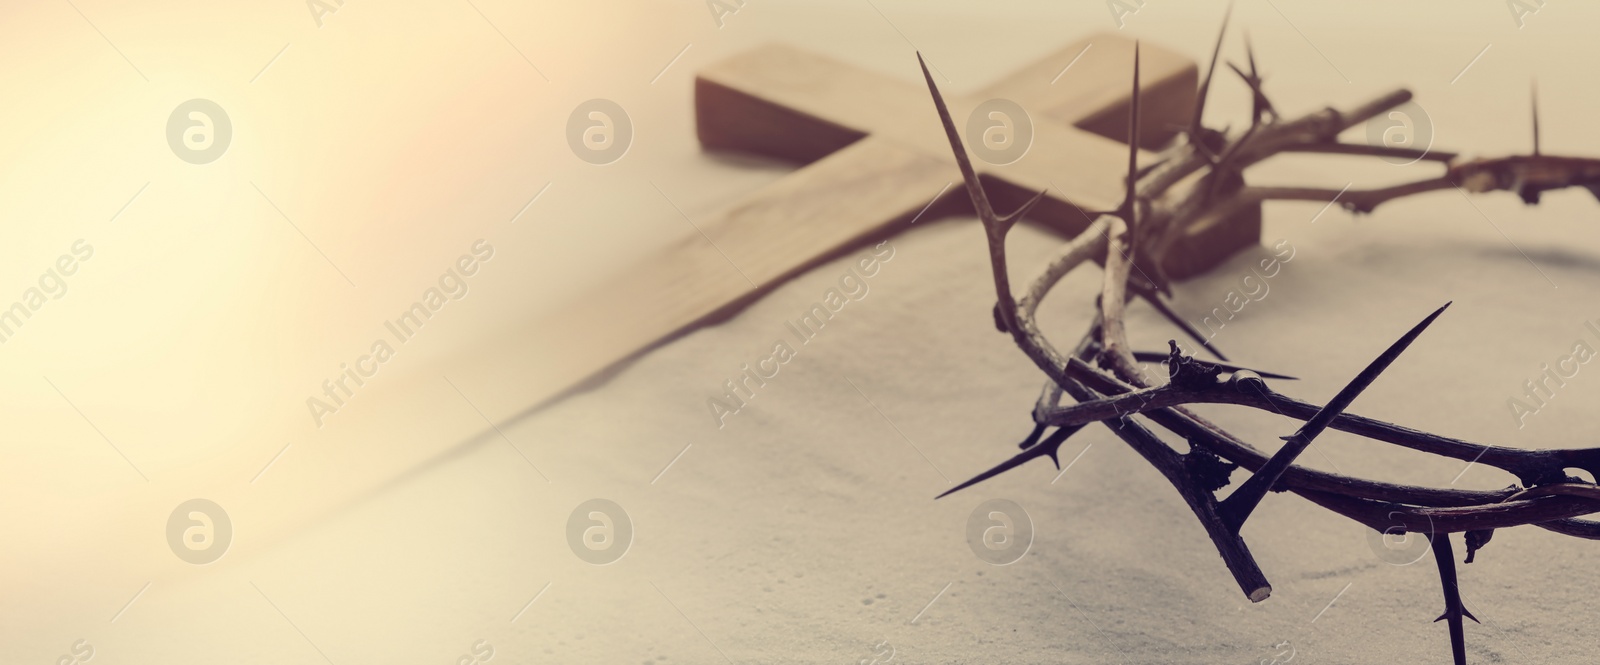 Image of Passion Of Jesus Christ. Crown of thorns and wooden cross on sand, banner design